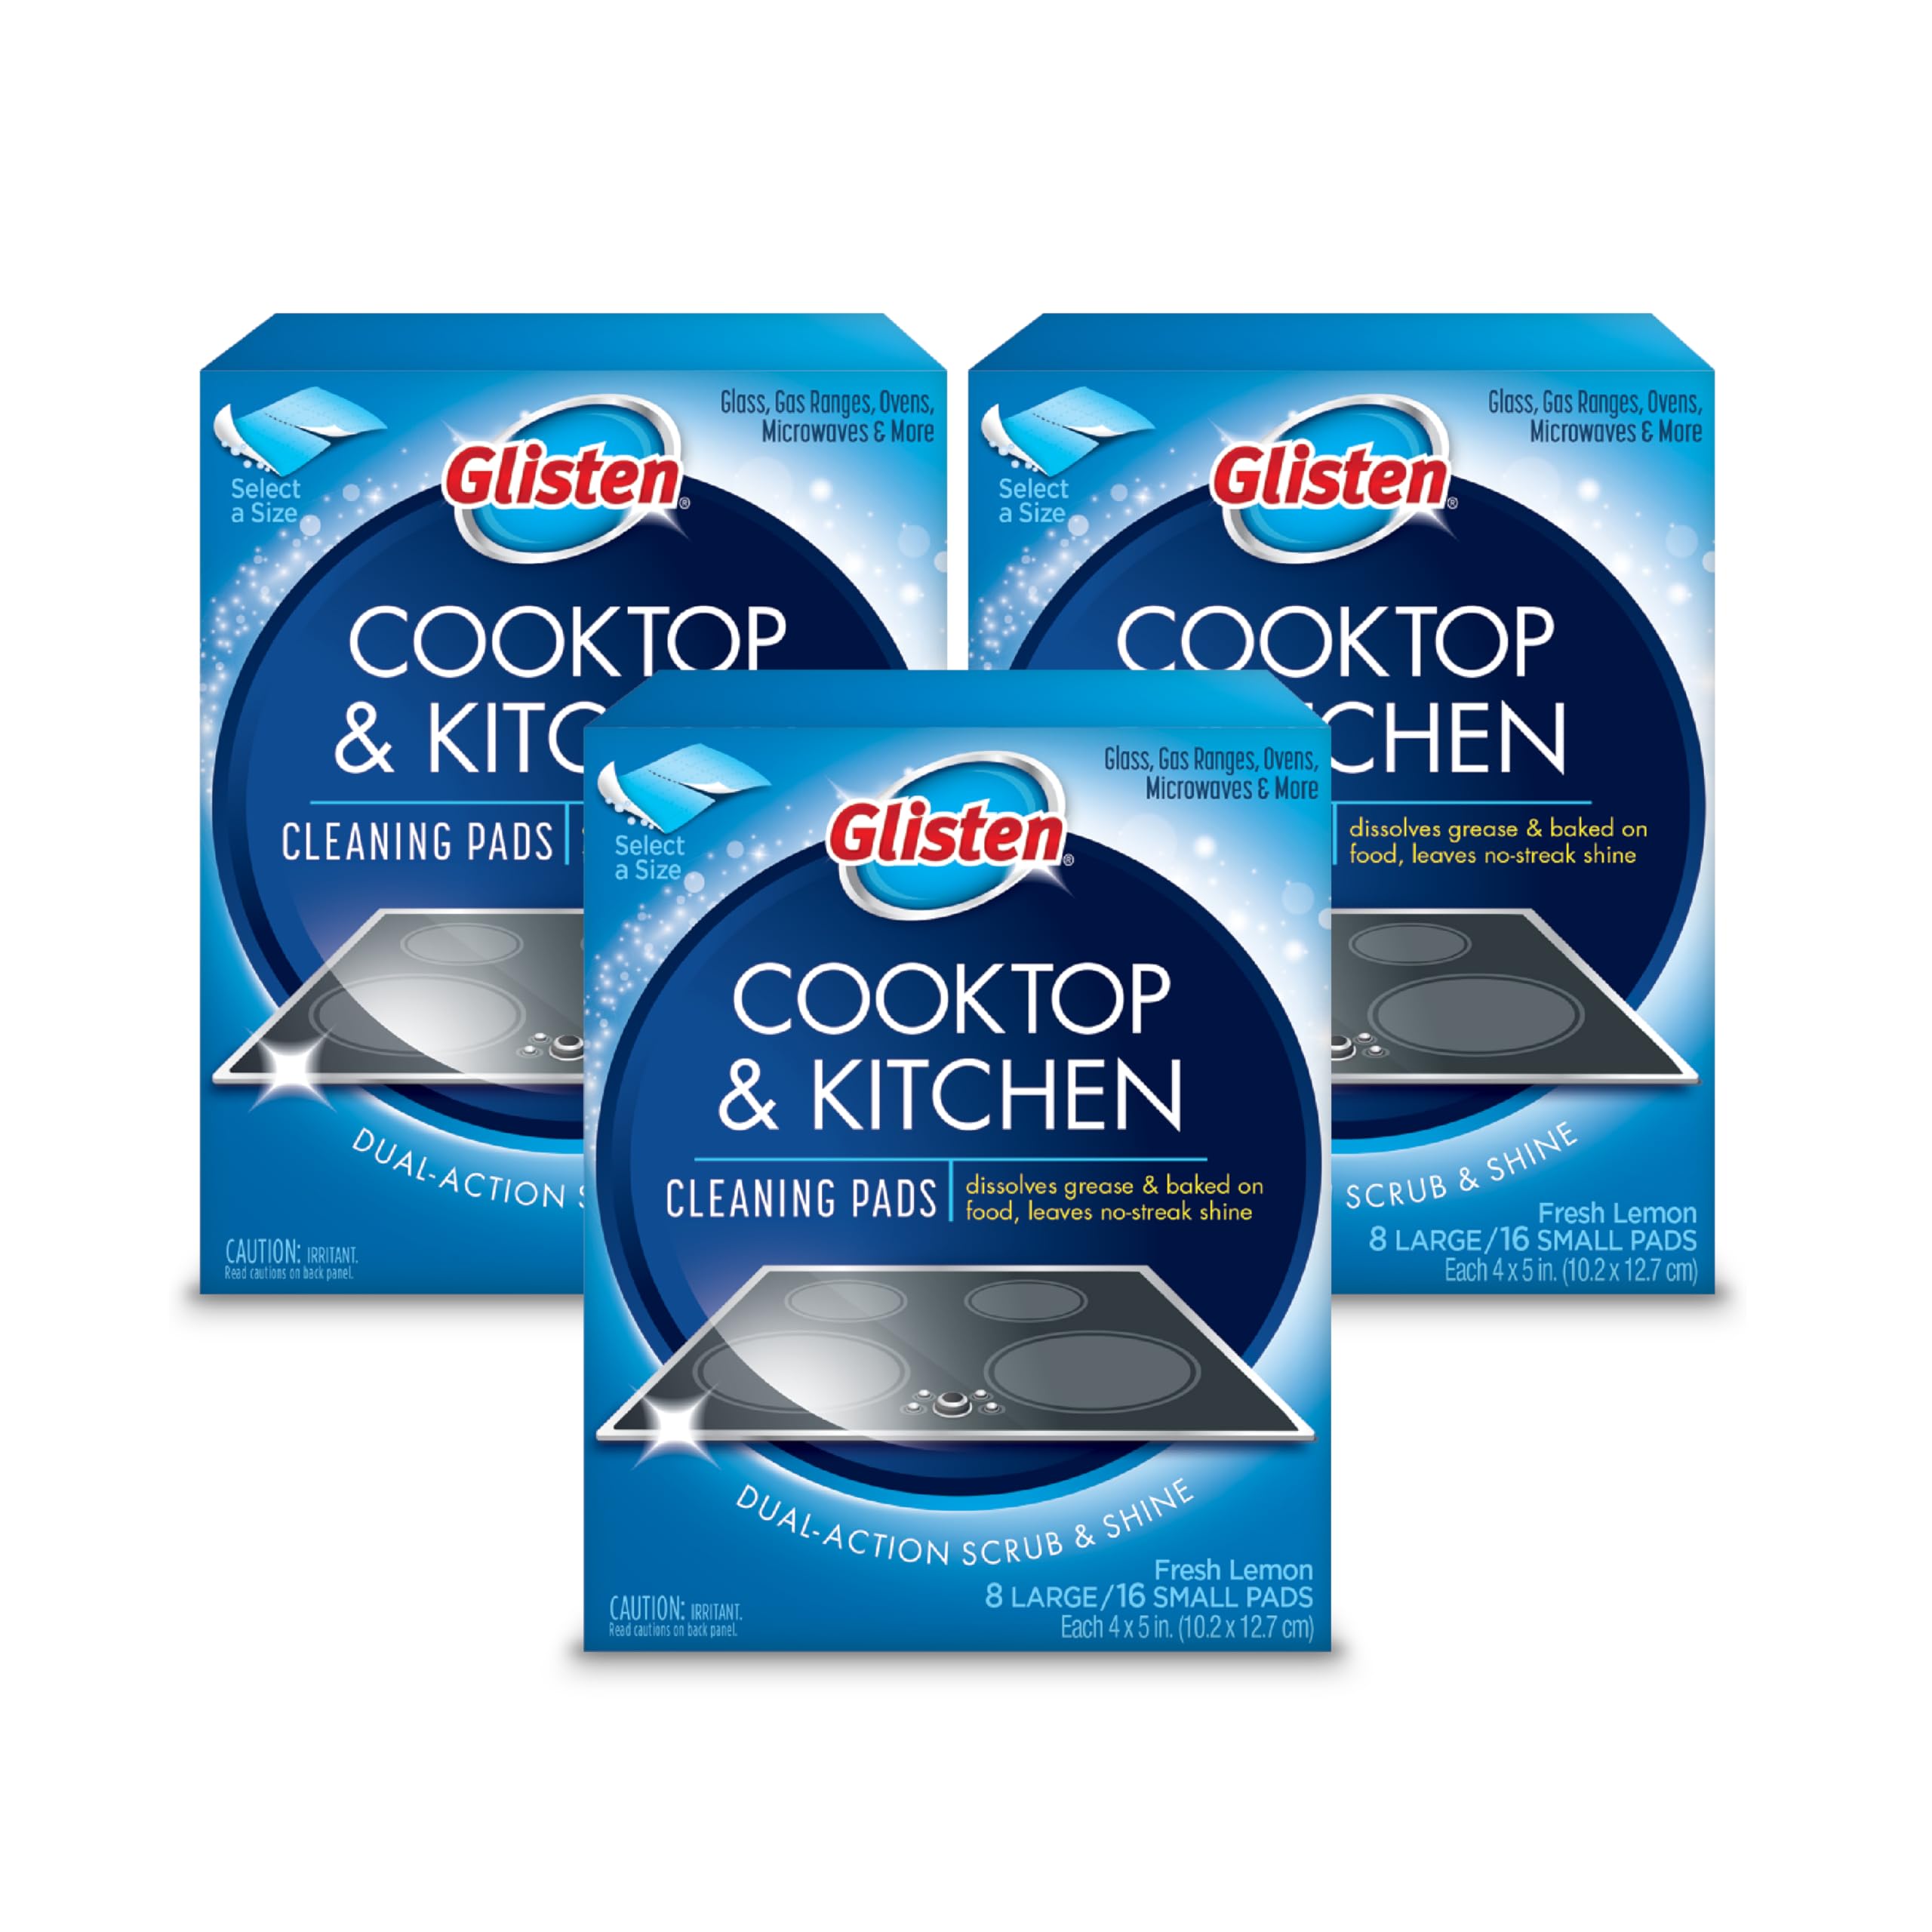 Glisten Cooktop and Kitchen Cleaning Pads, Dissolves Grease and Baked on Foods, Lemon Scent, 24 Large Pads or 48 Small Pads